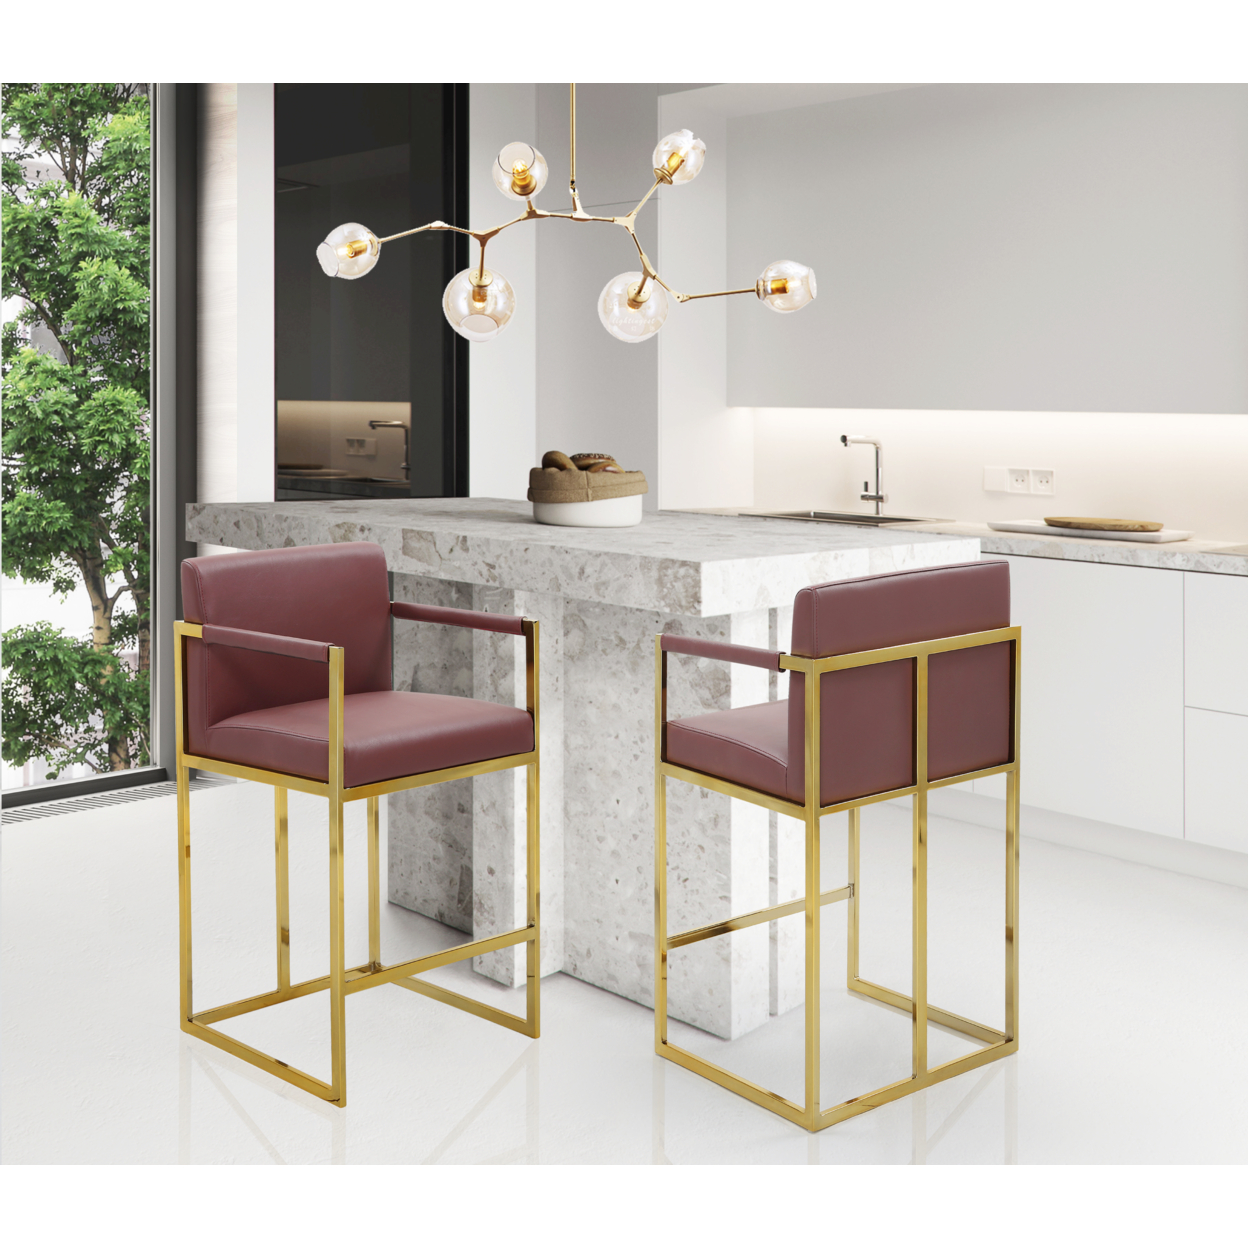 Gertrude Bar Stool Or Counter Stool Chair PU Leather Upholstered Square Arm Design Architectural Goldtone Solid Metal Base - Wine, Height: 3